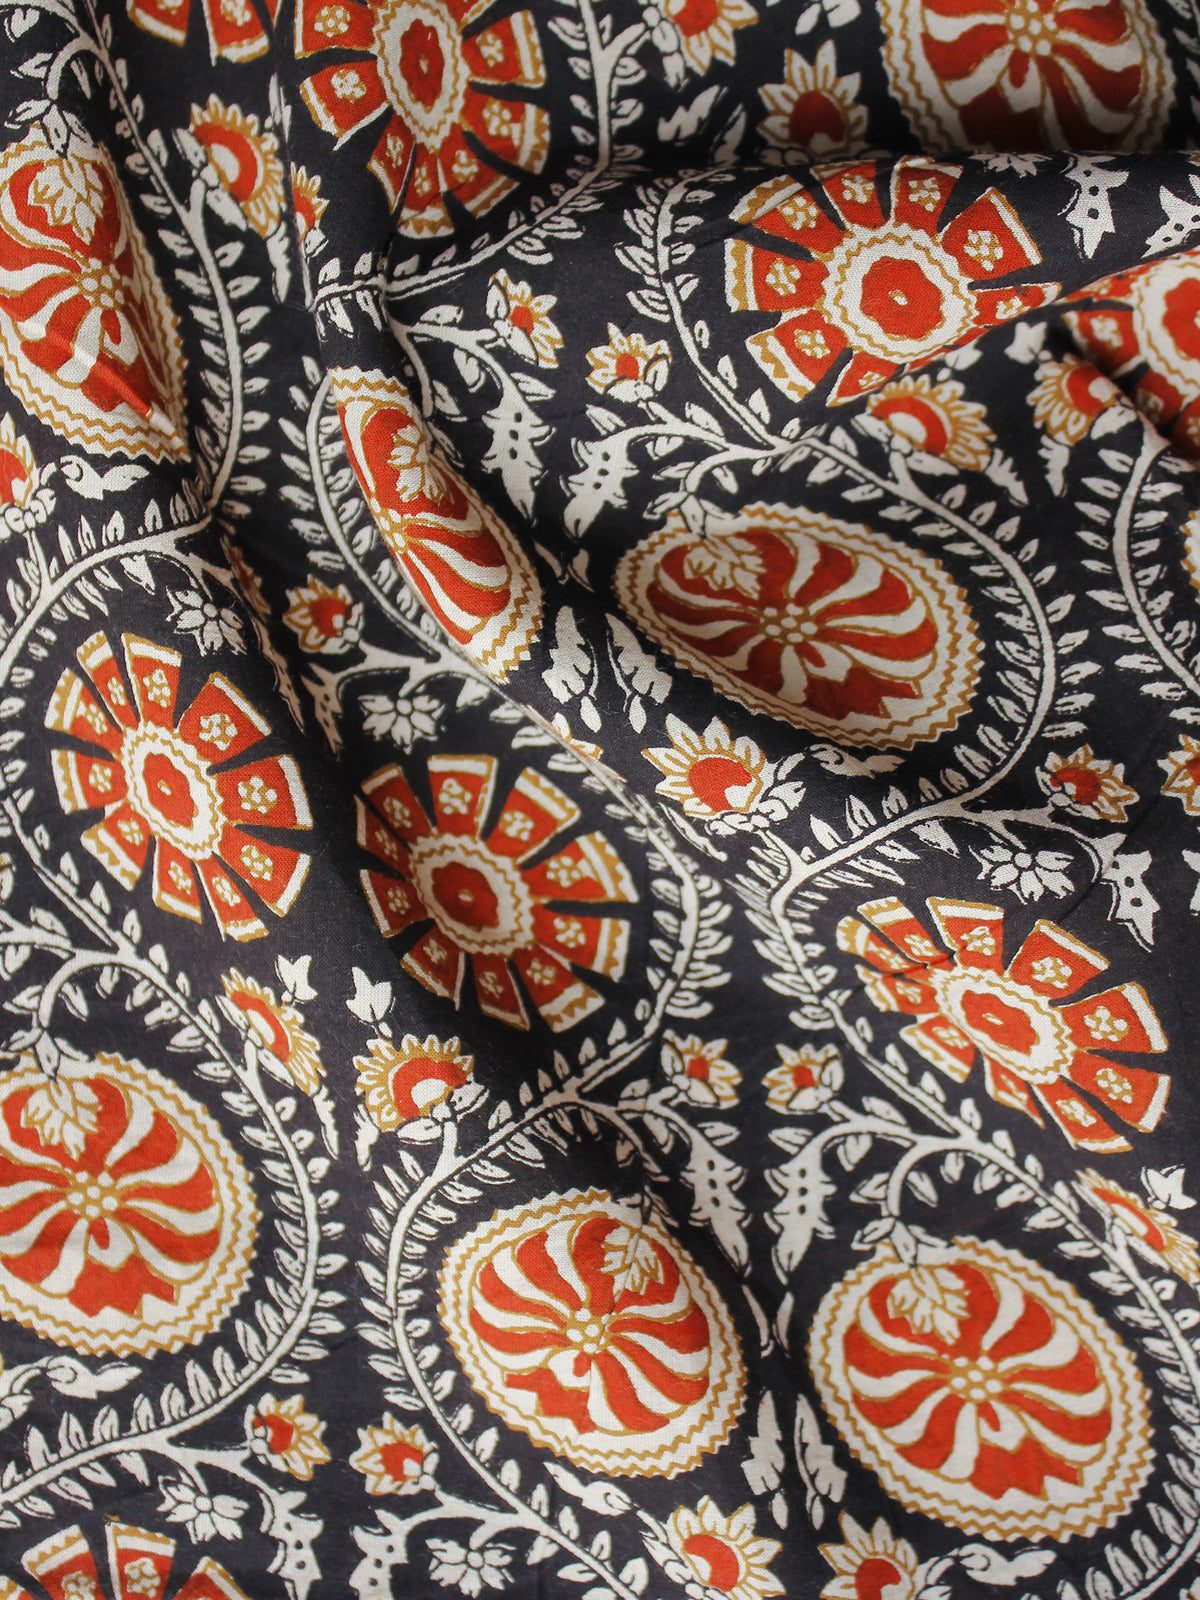 Black Red Ivory Hand Block Printed Cotton Fabric Per Meter - F001F1006